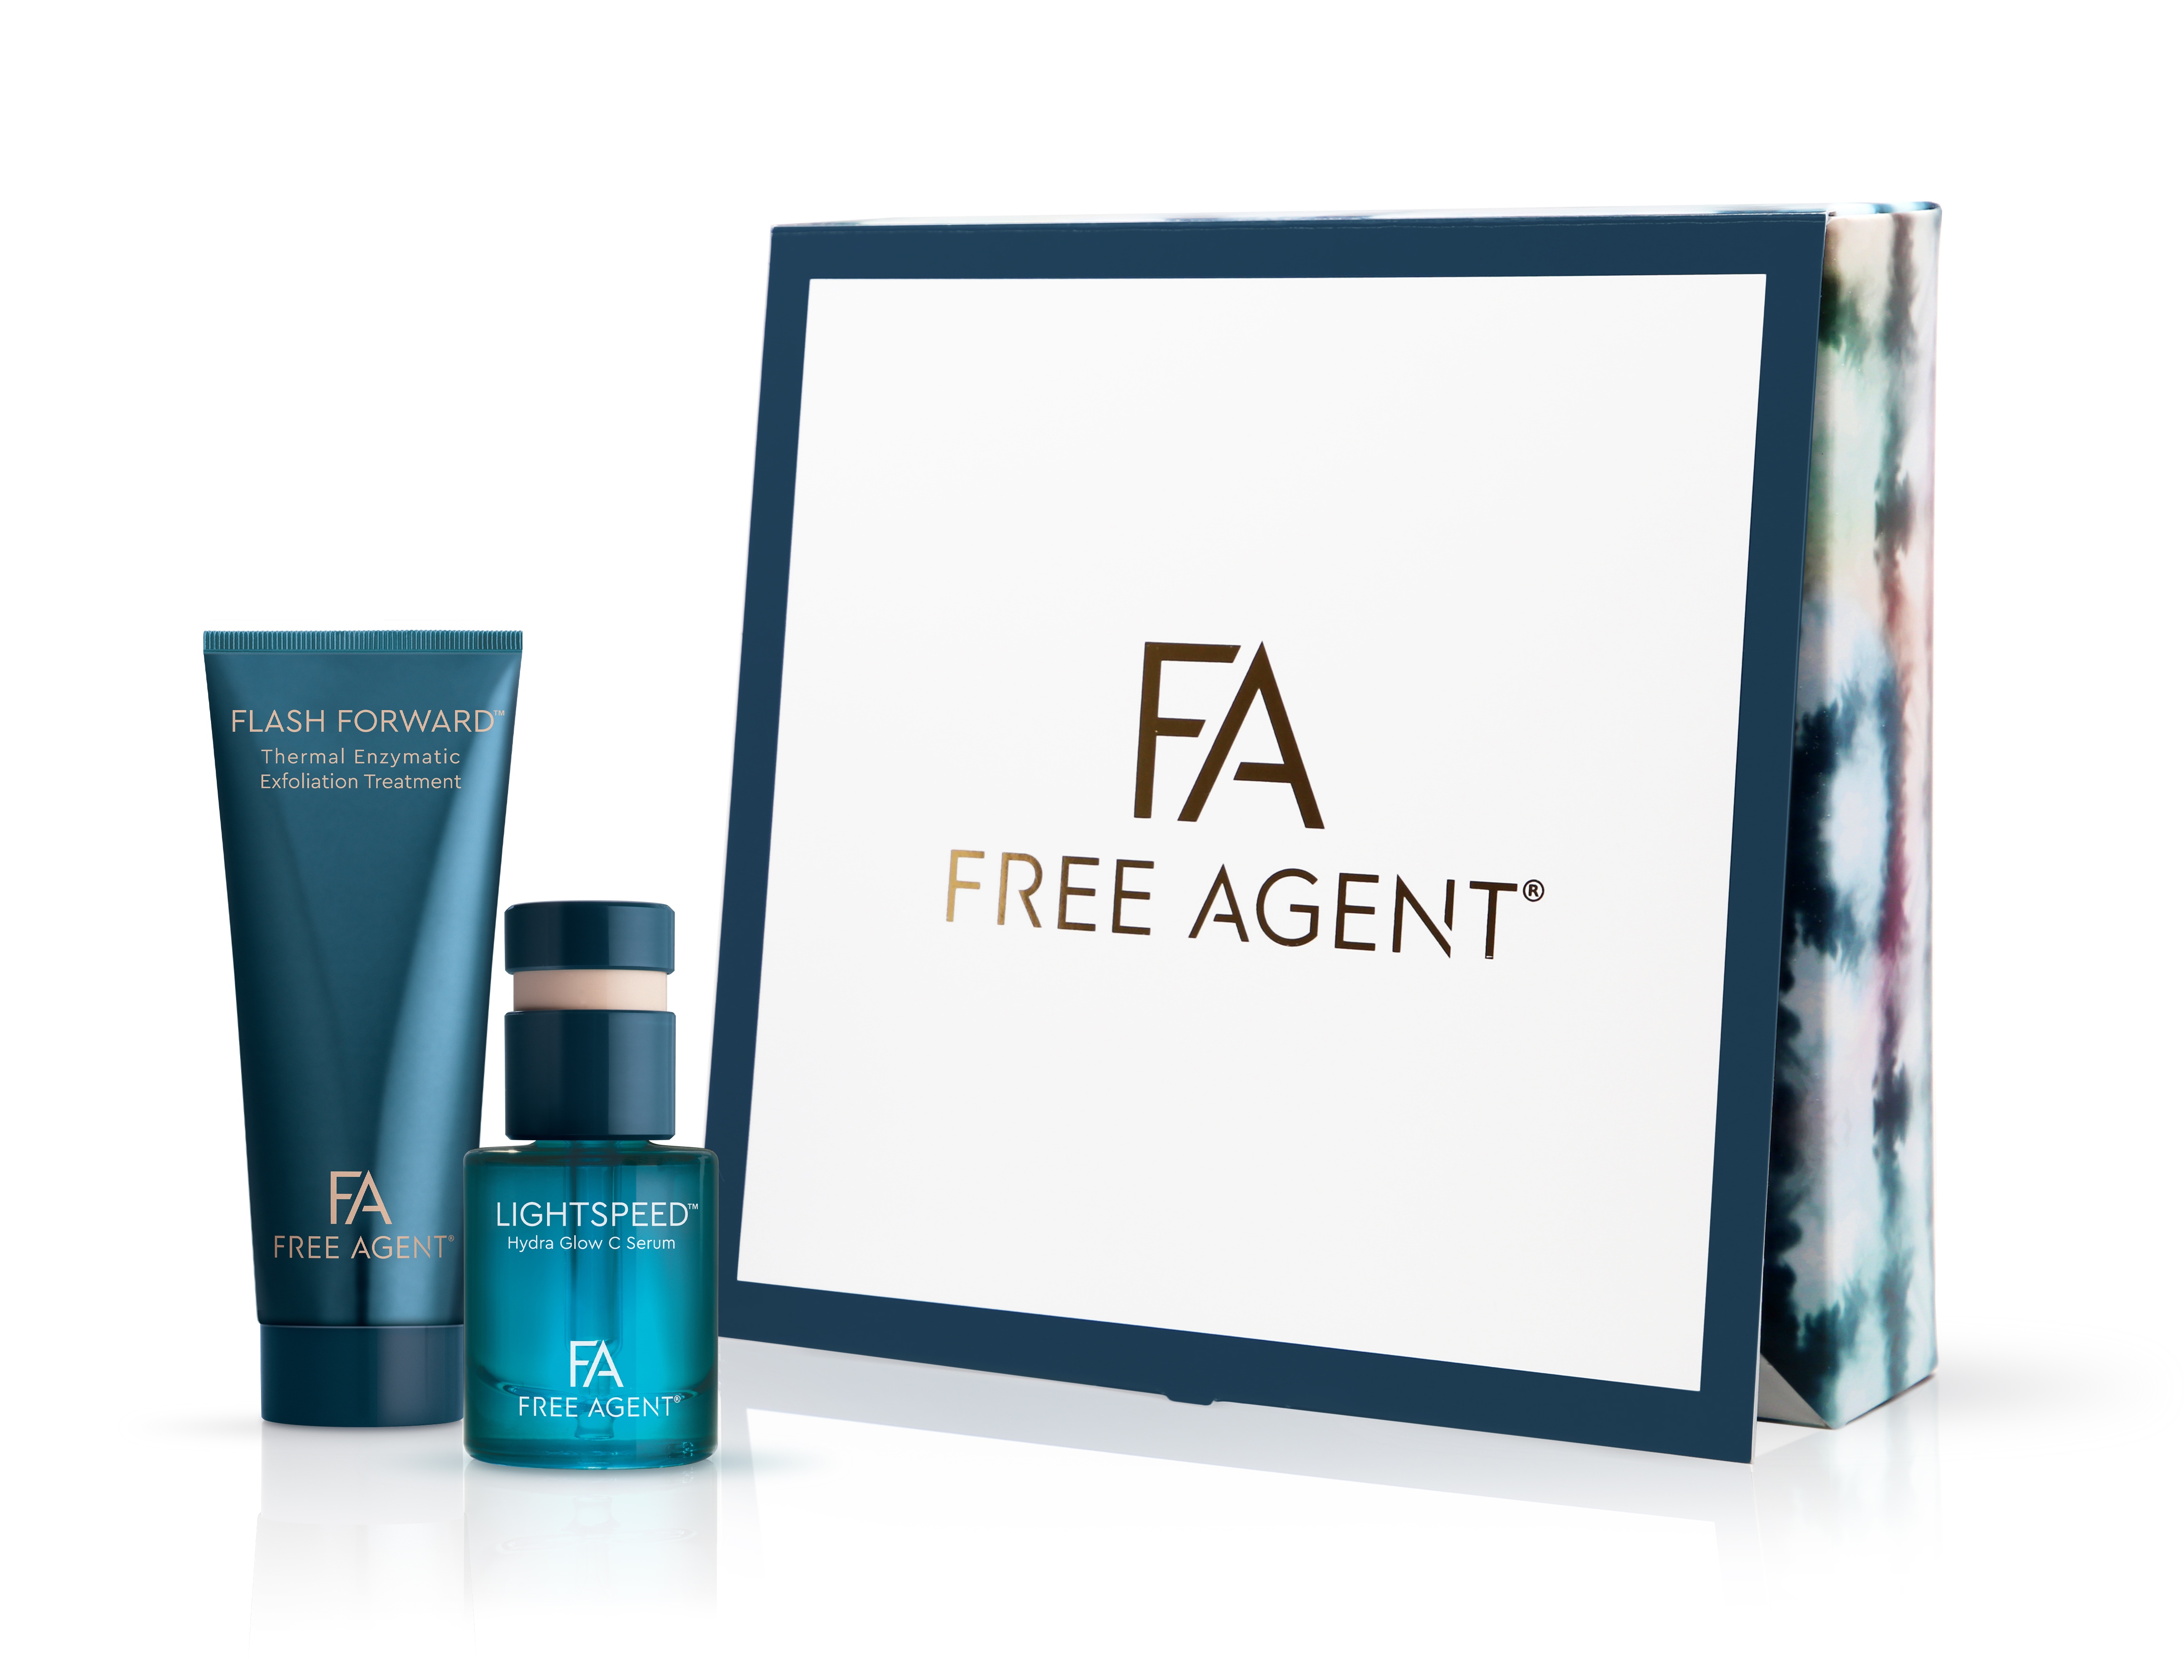 Free Agent Skincare Complexion Resurrection Treatment Duo 2 credit Free Agent Skincare